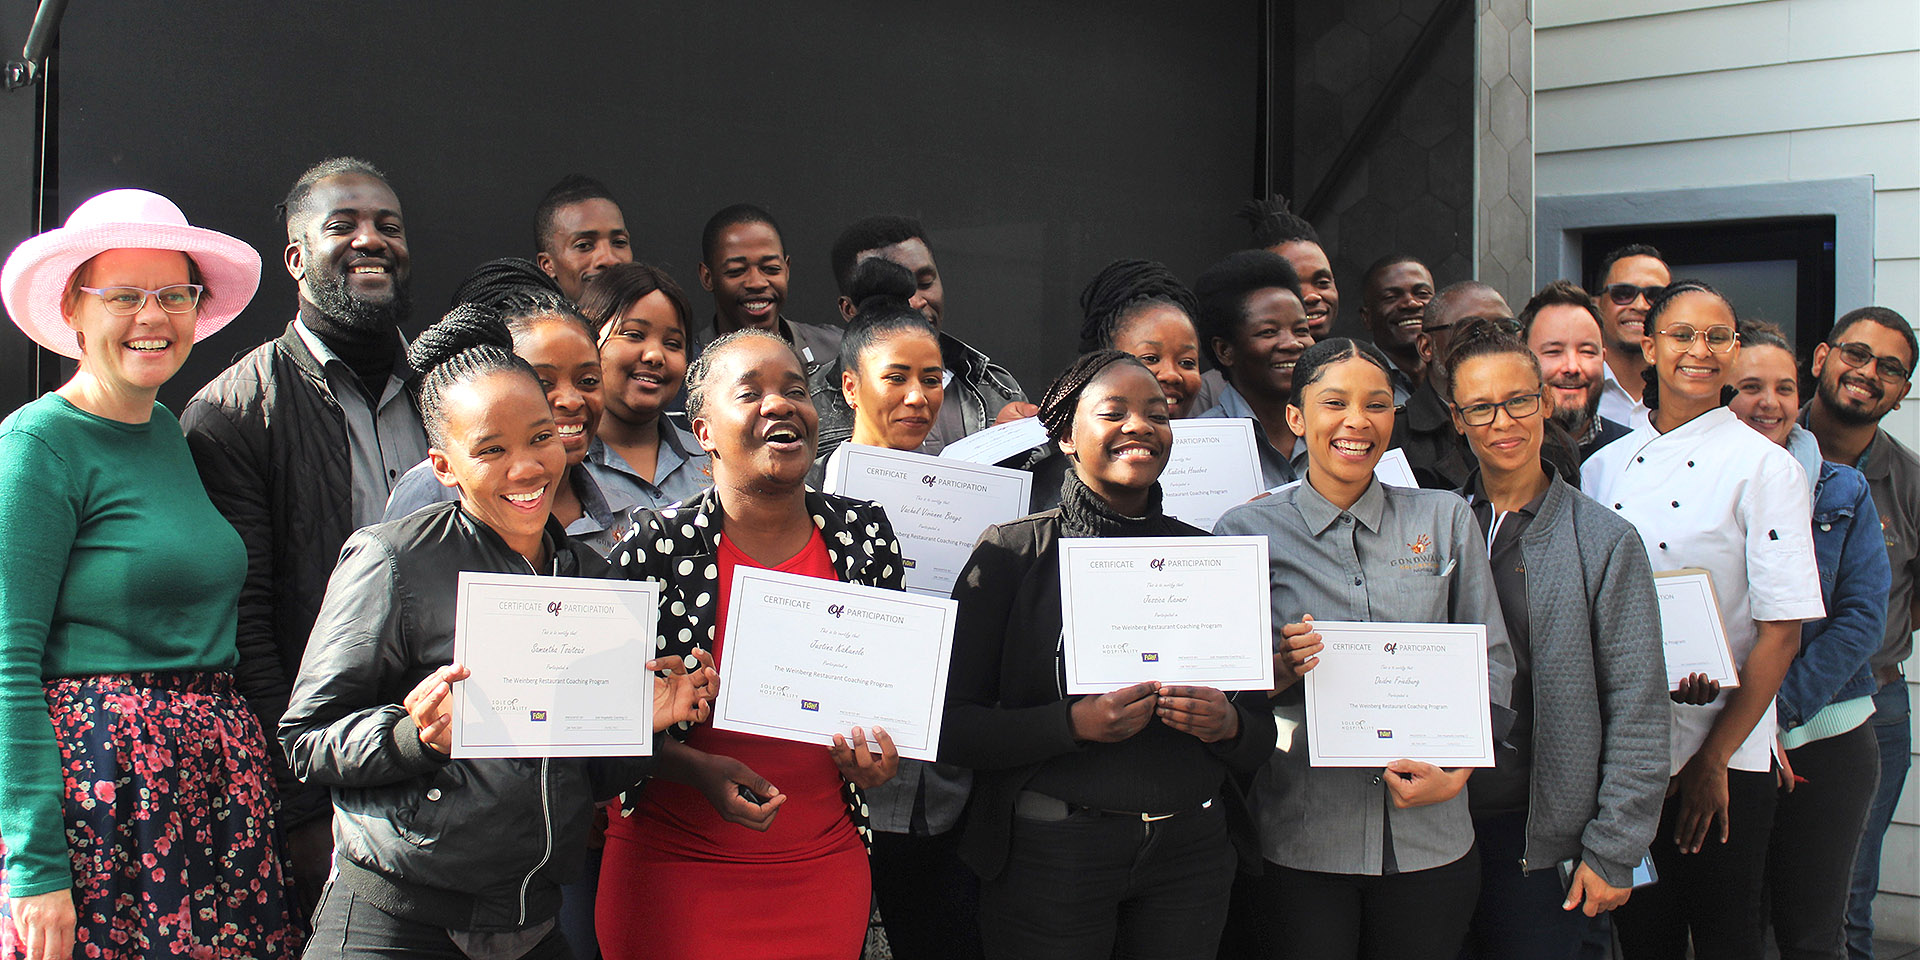 The Weinberg Windhoek Team with certificates